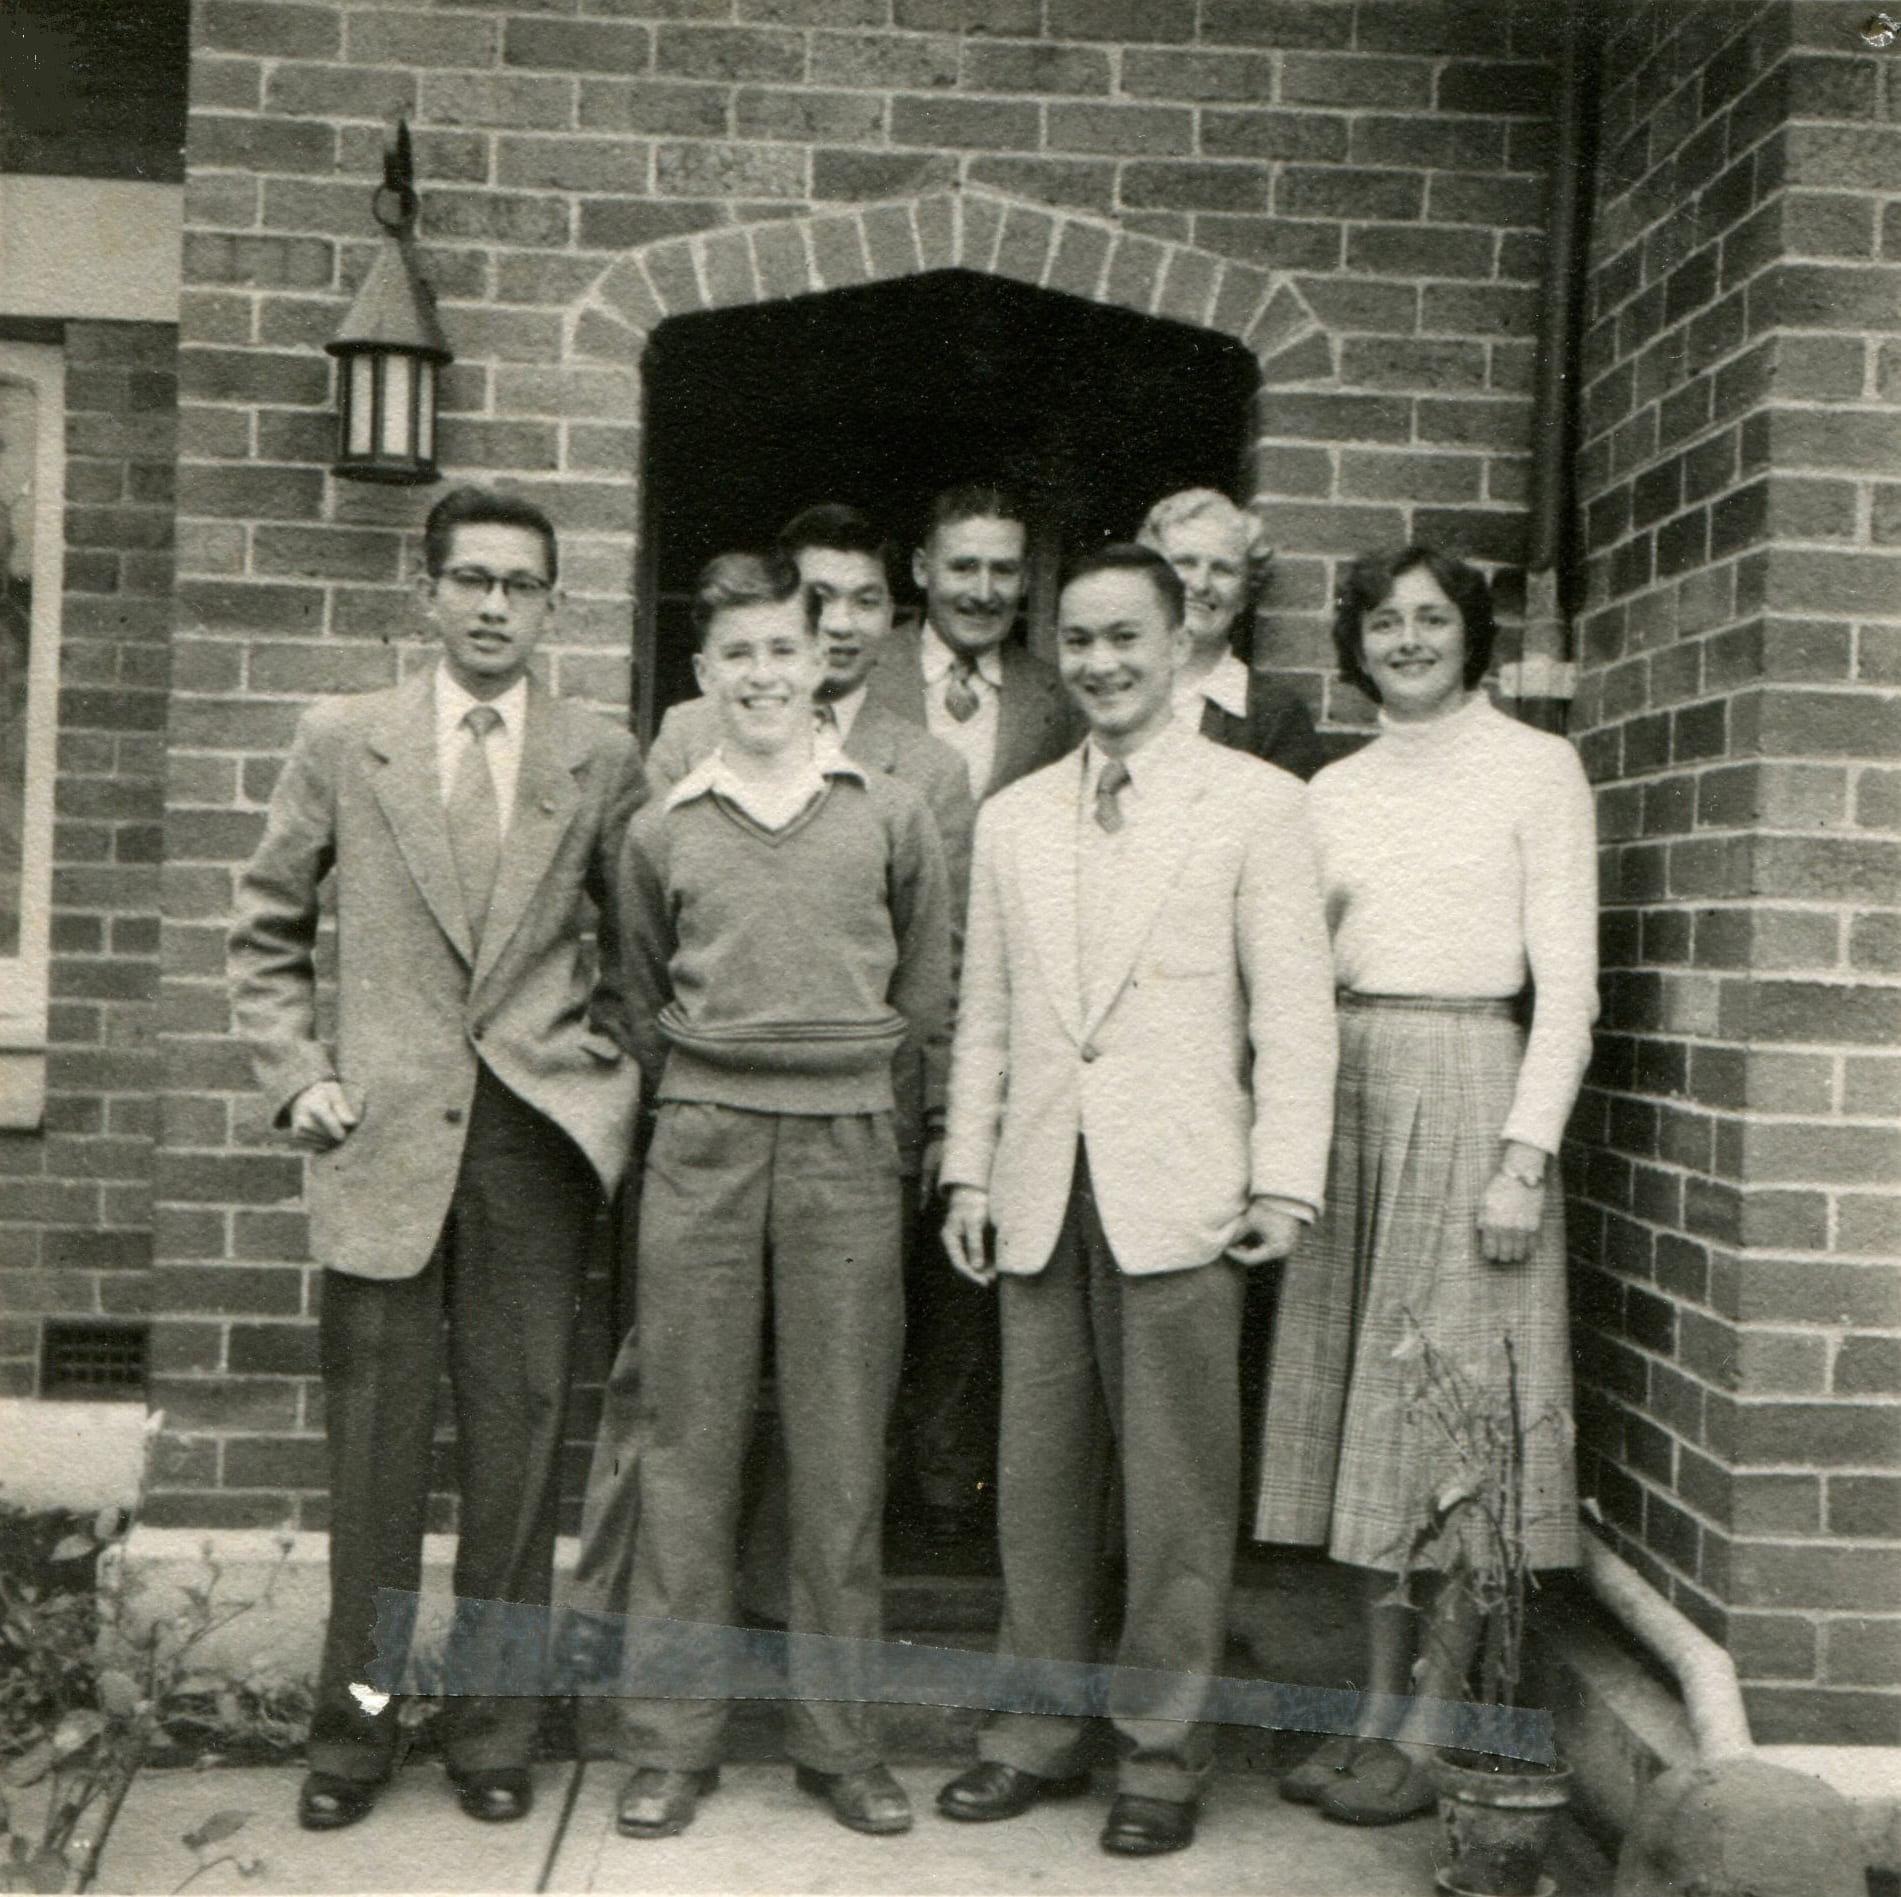 A group of people including Olive Wykes standing outside a brick building.